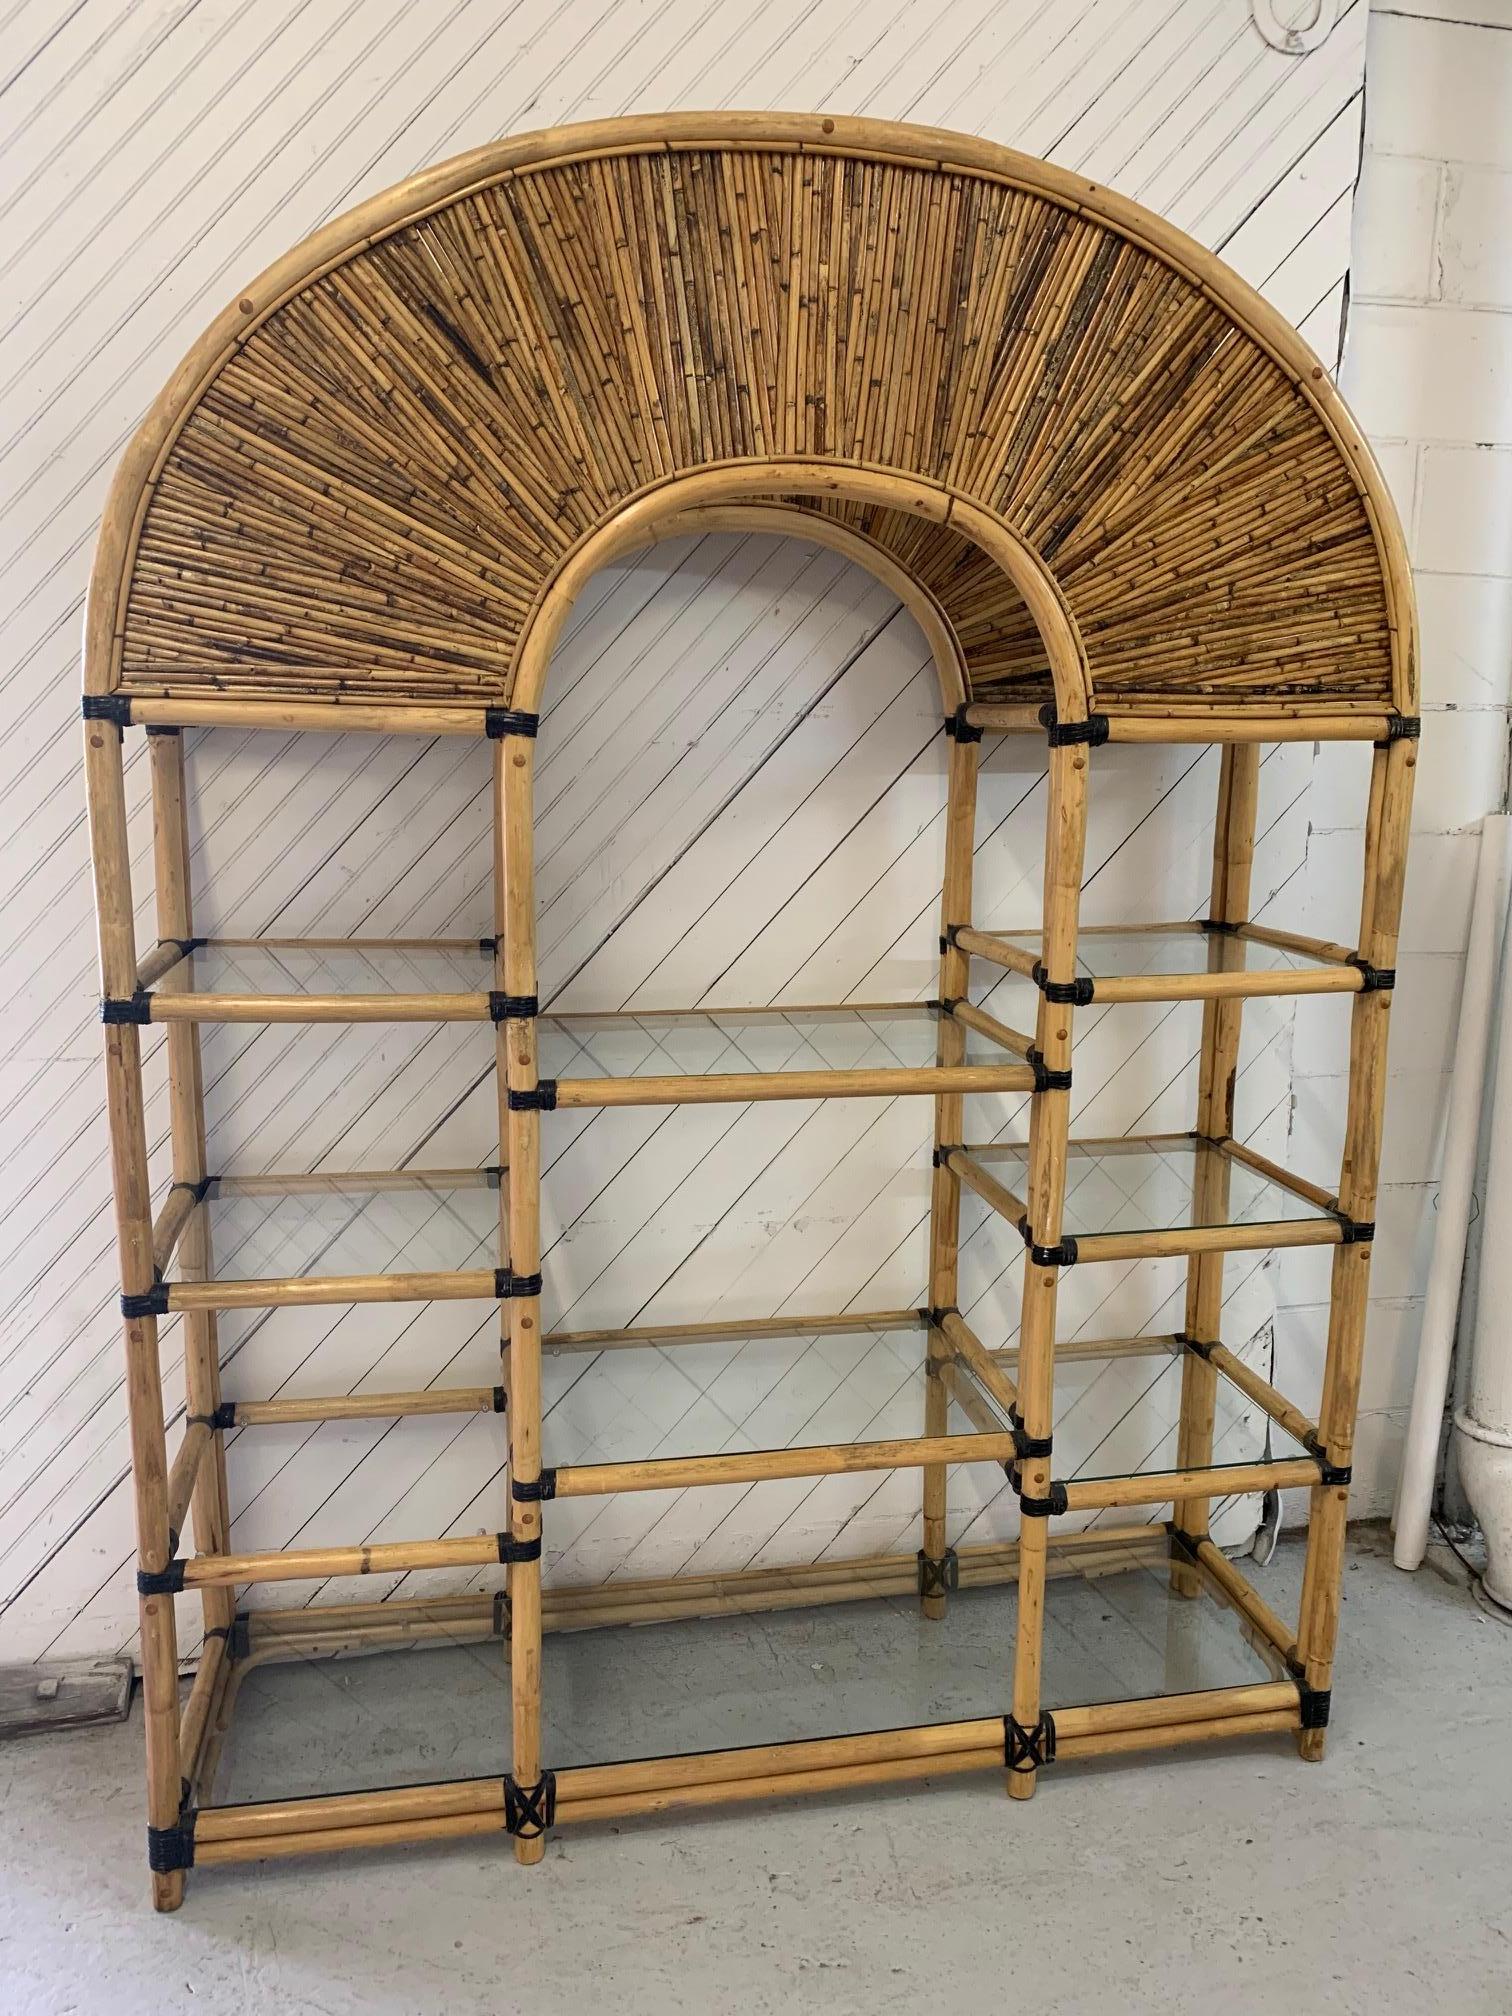 Large rattan étagère features inlay across arched top and glass shelving for storage and display. Very good vintage condition with minor imperfections consistent with age.